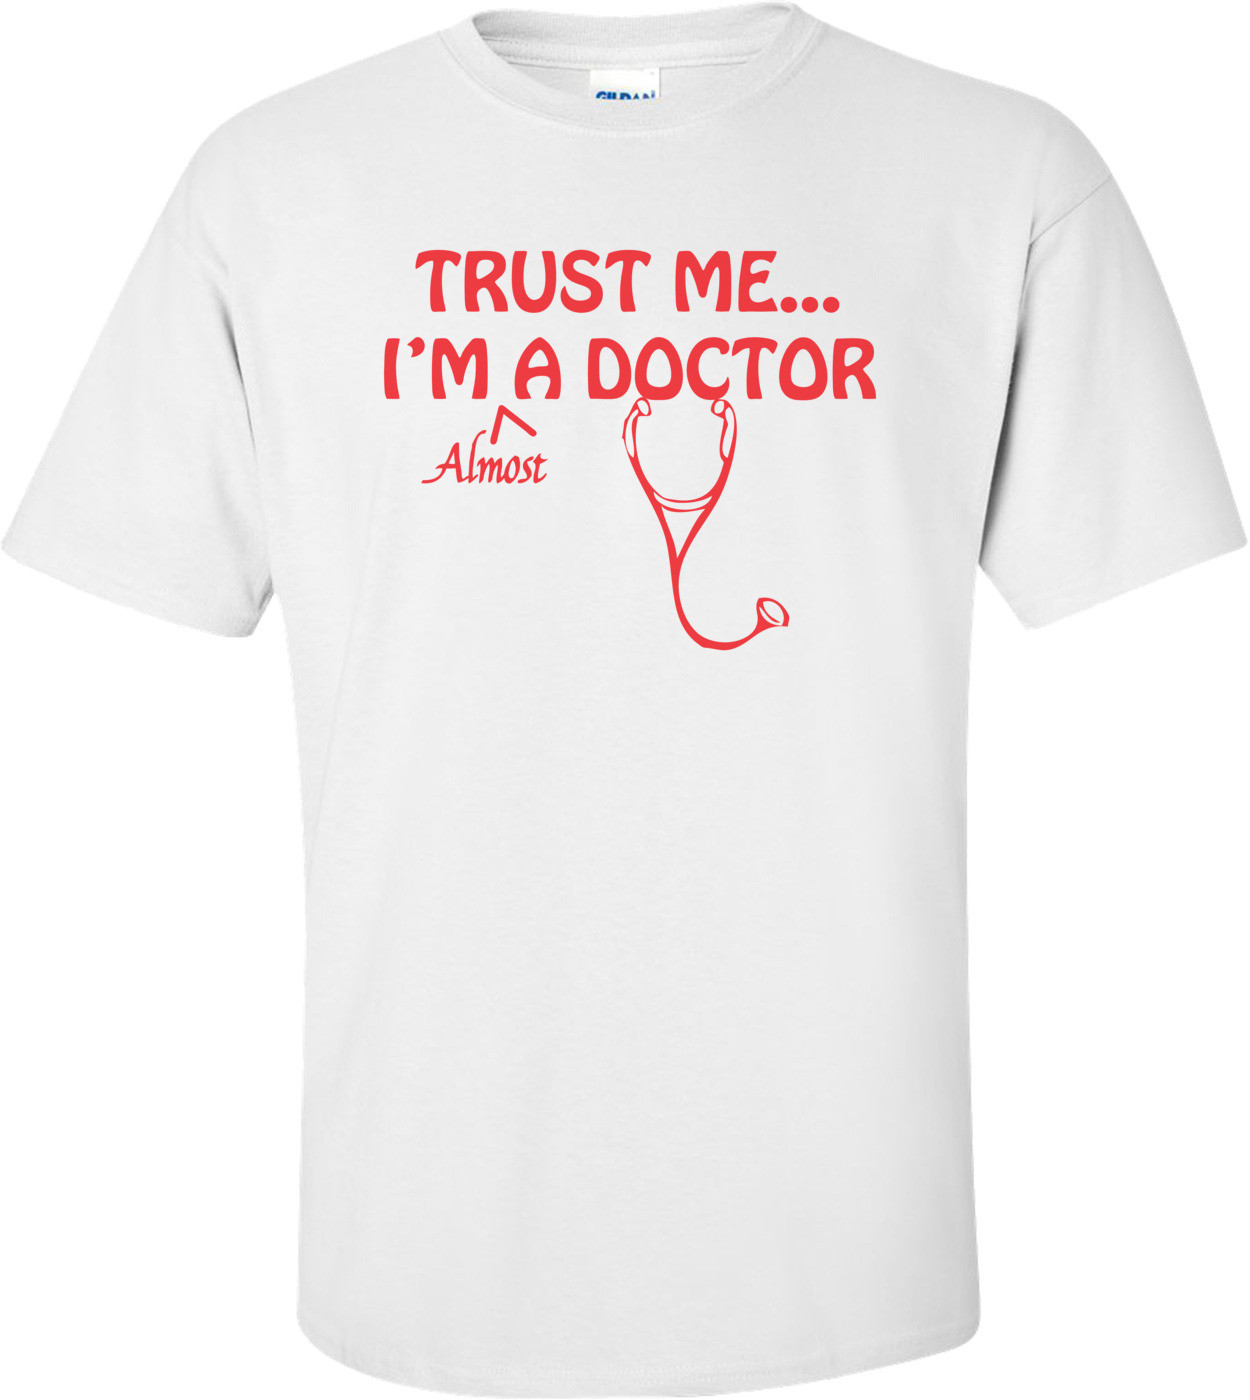 Trust Me, I'm Almost A Doctor Shirt